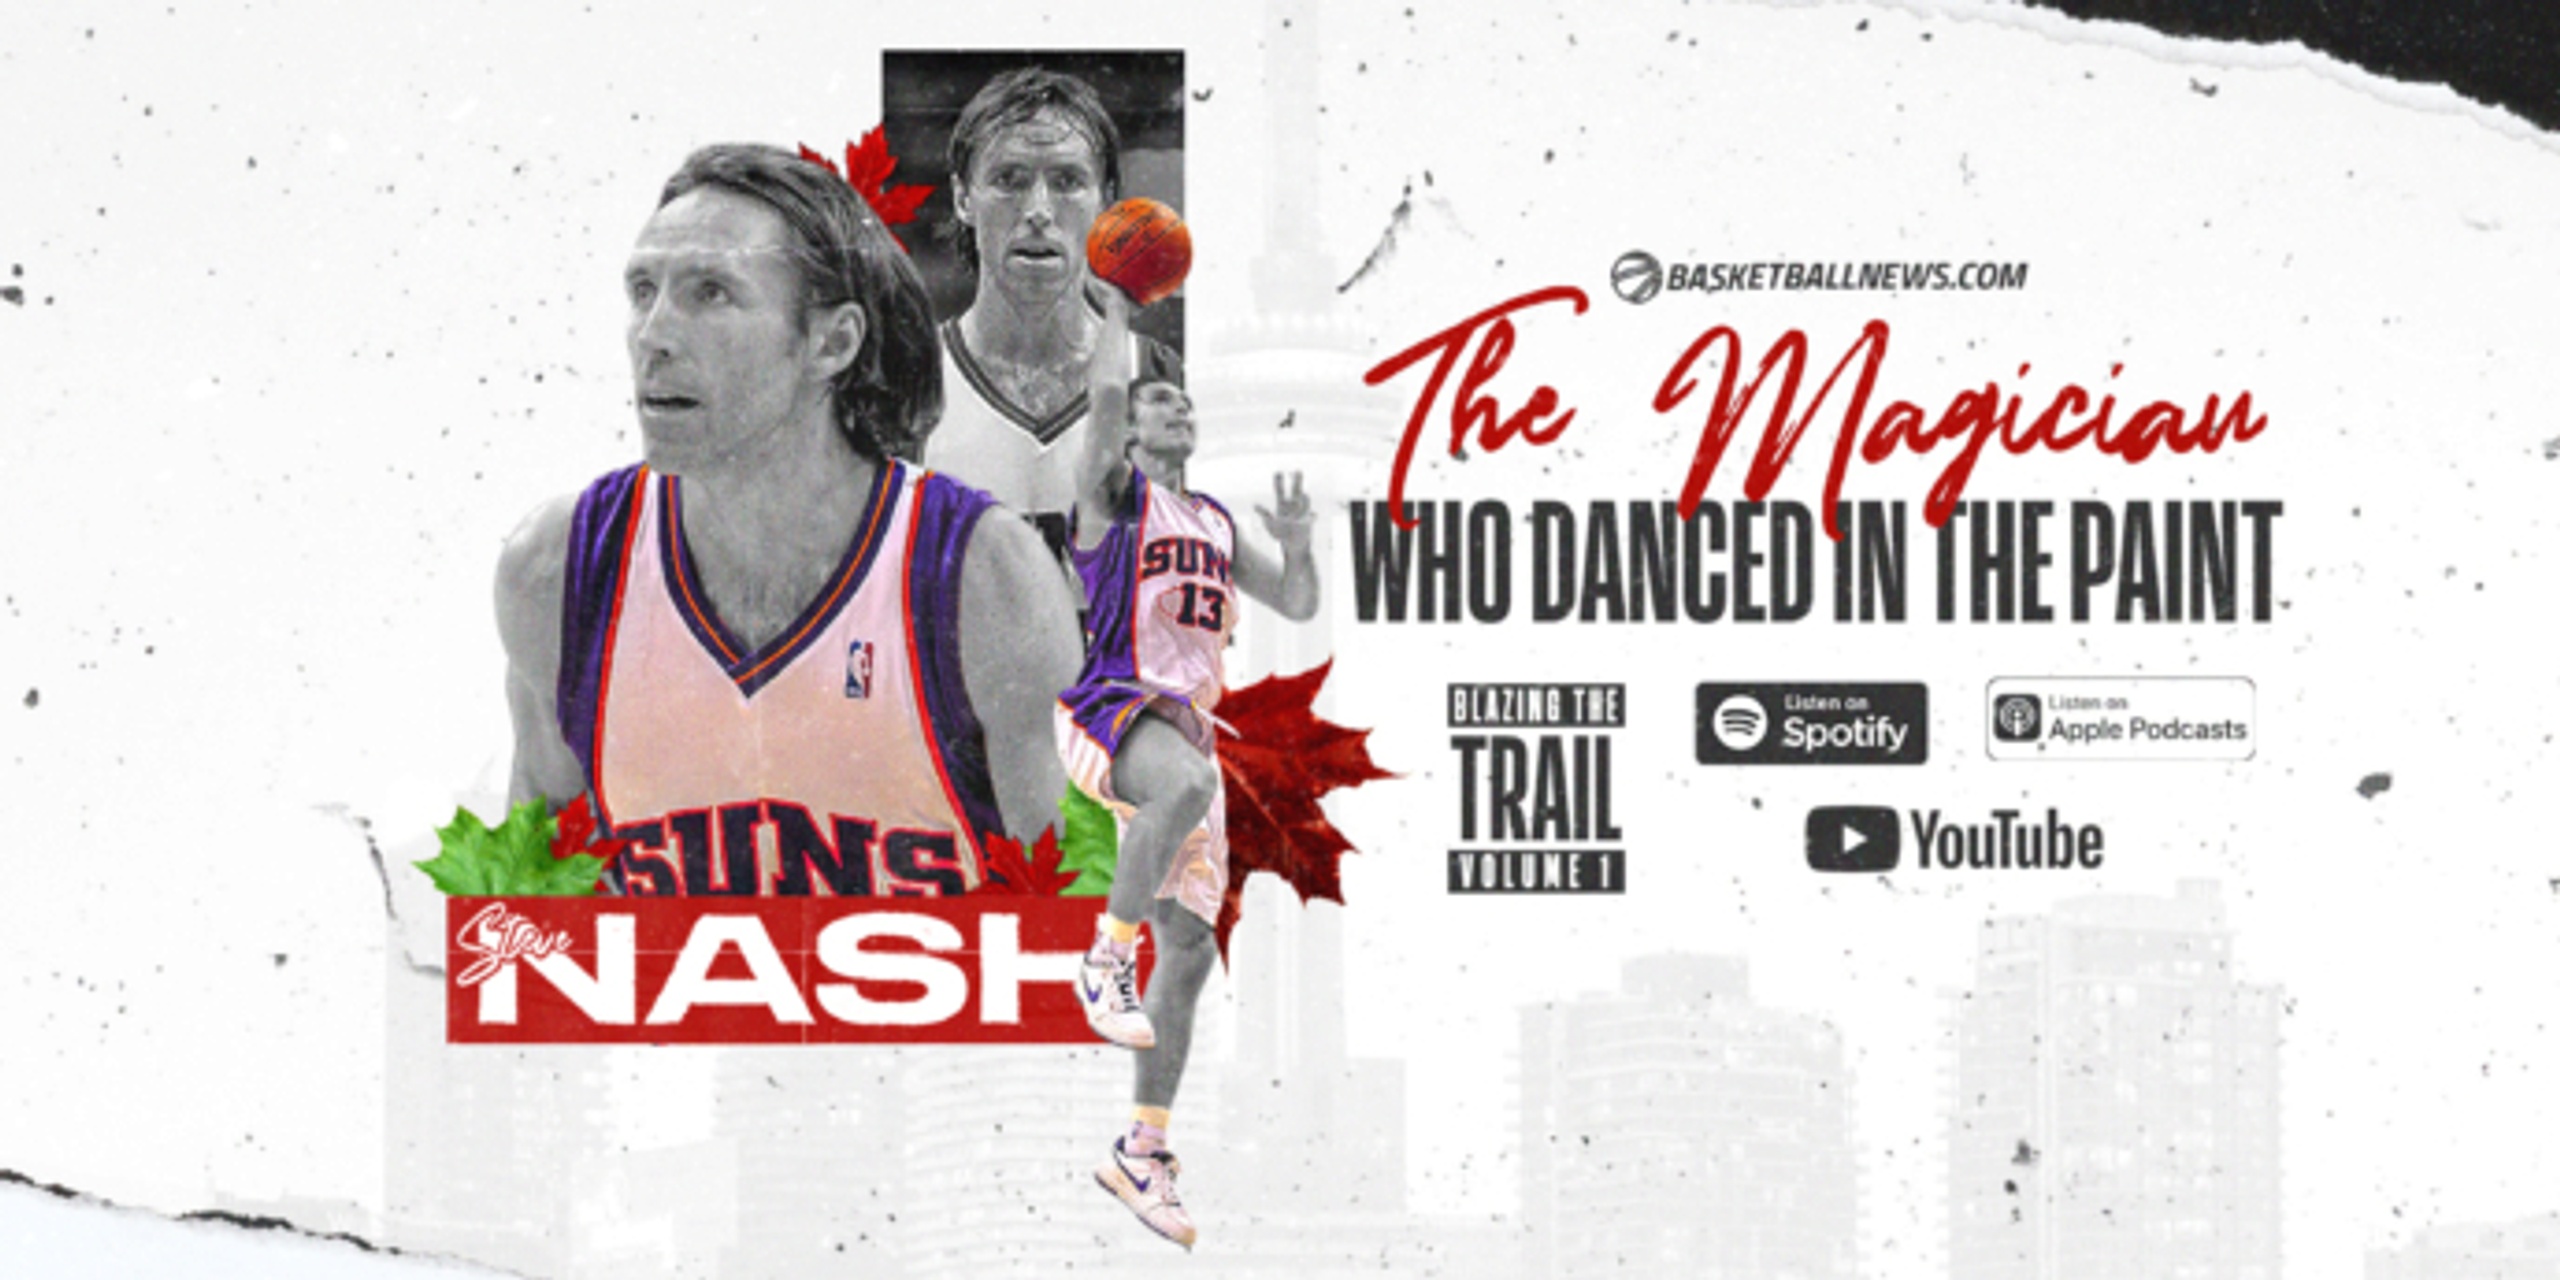 Blazing the Trail: Steve Nash, the magician who danced in the paint